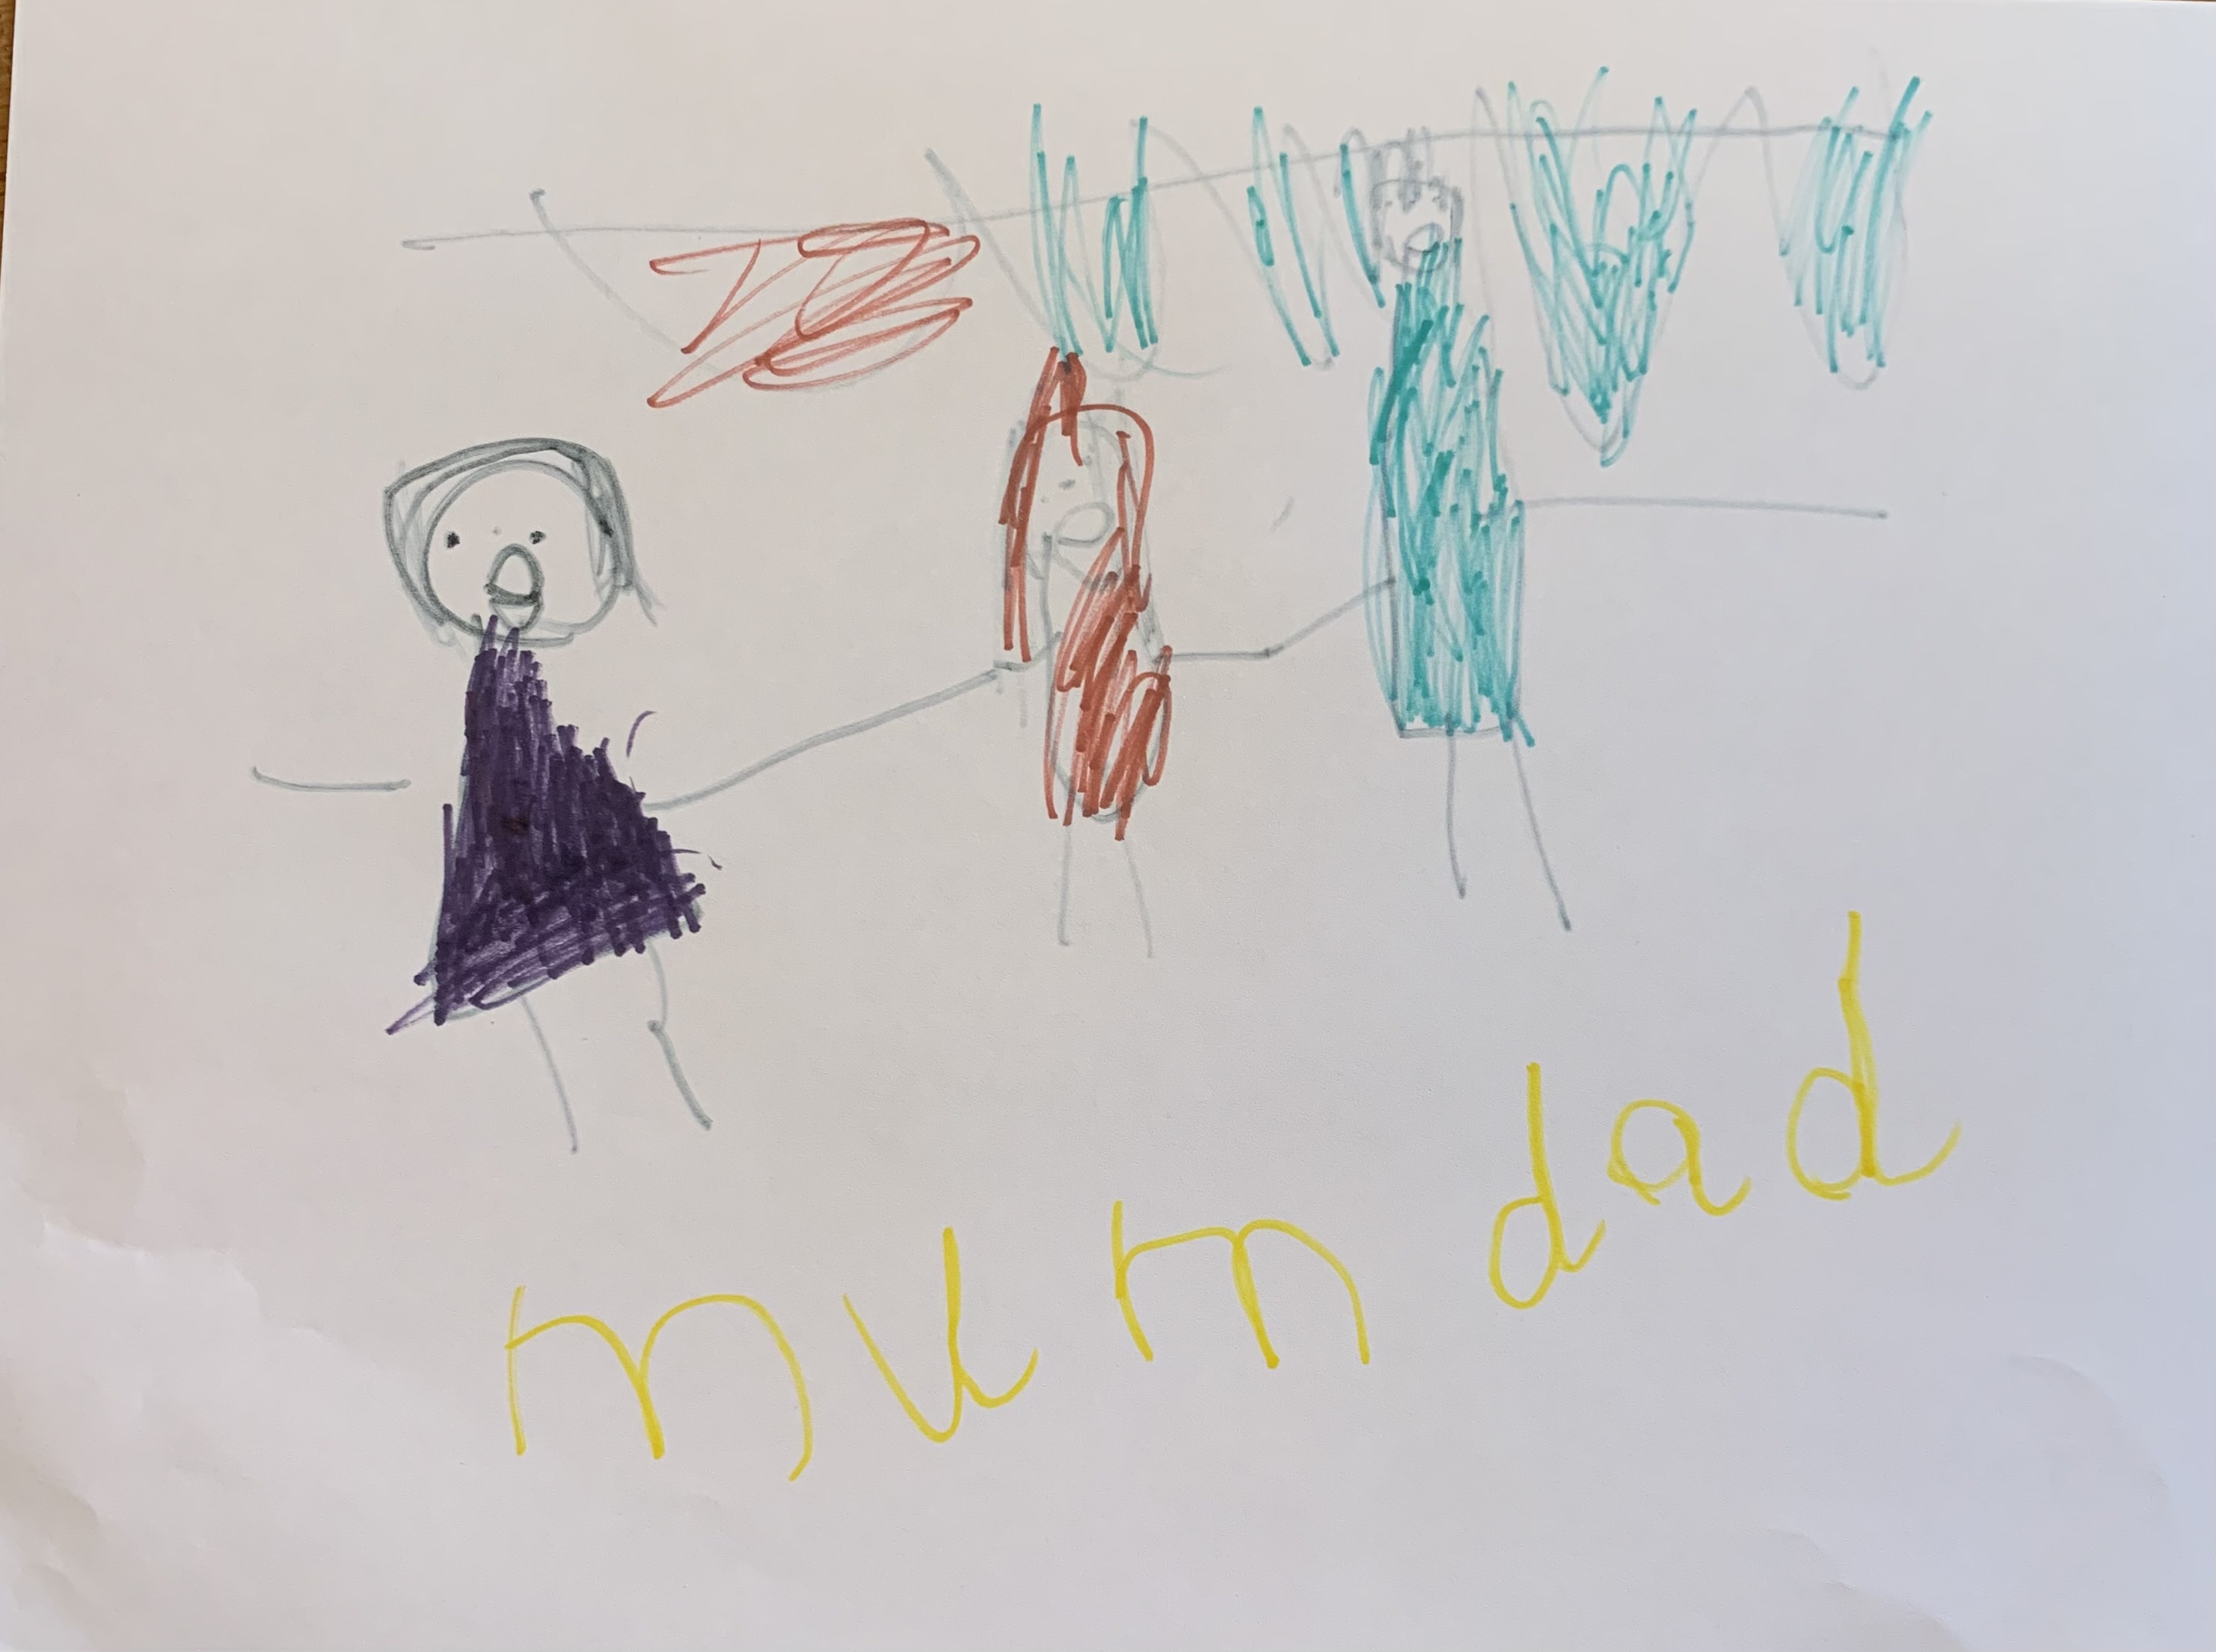 Colin's daughter's picture of her family